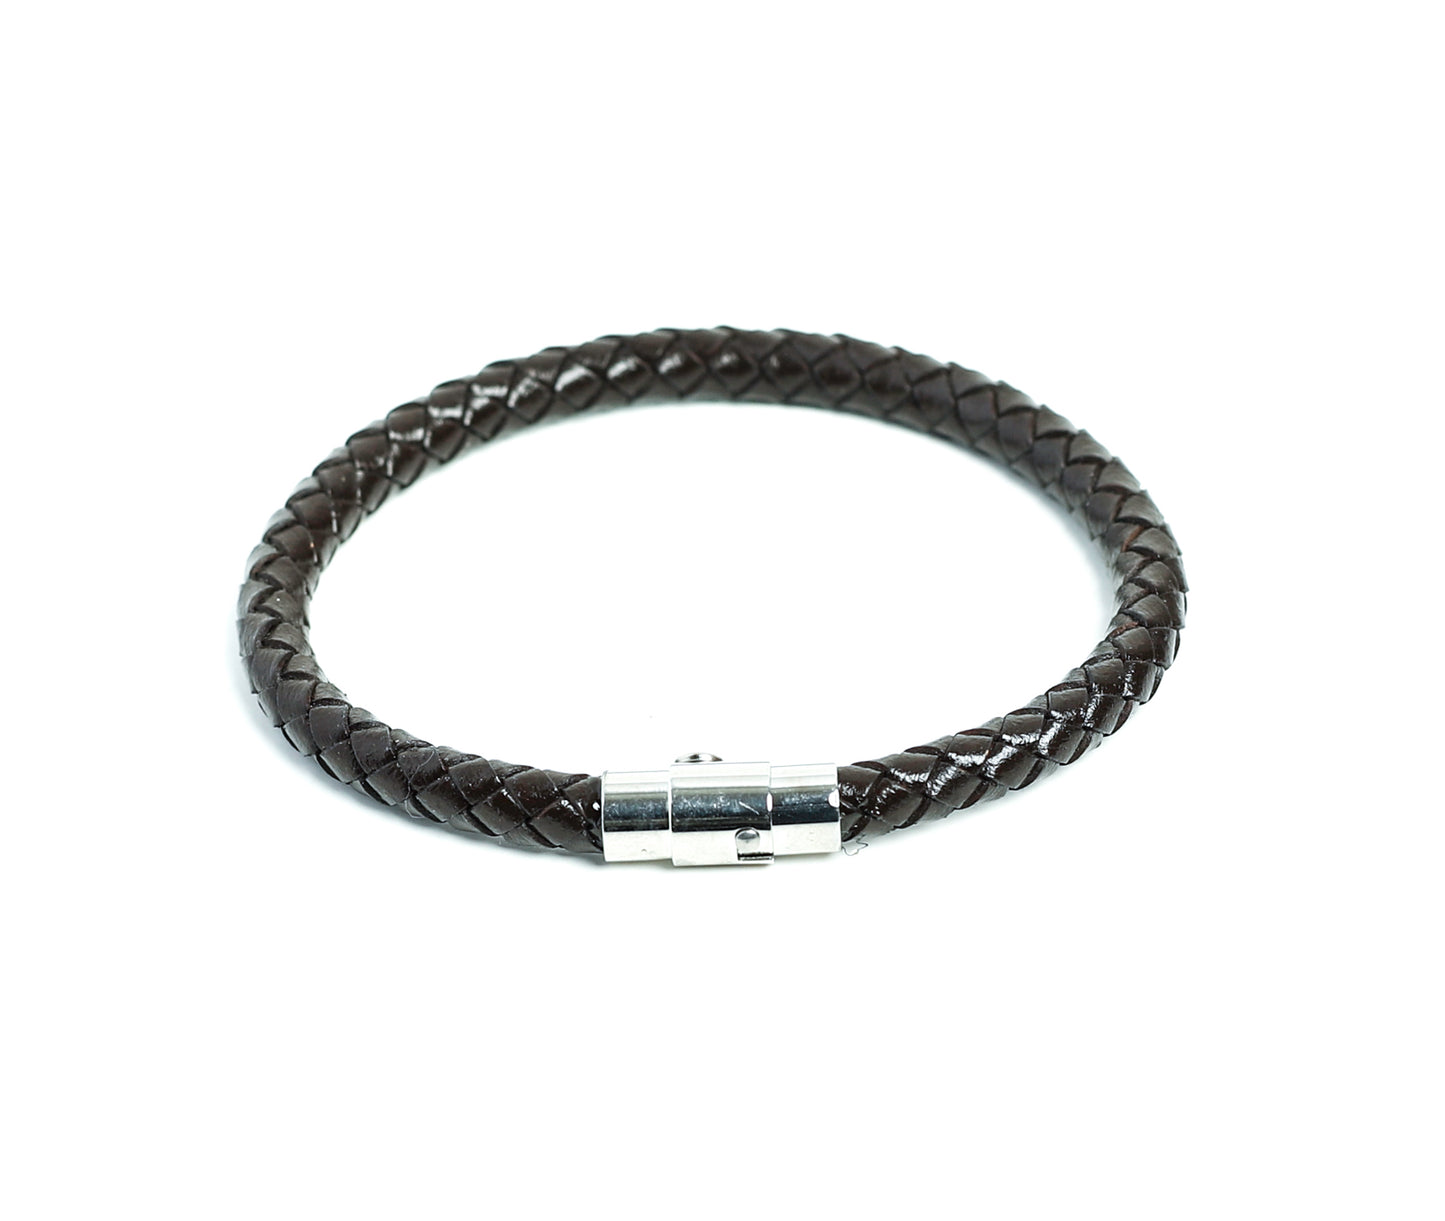 Mens genuine dark brown braided leather Bracelet with stainless steel clasp Closure  at RM KANDY